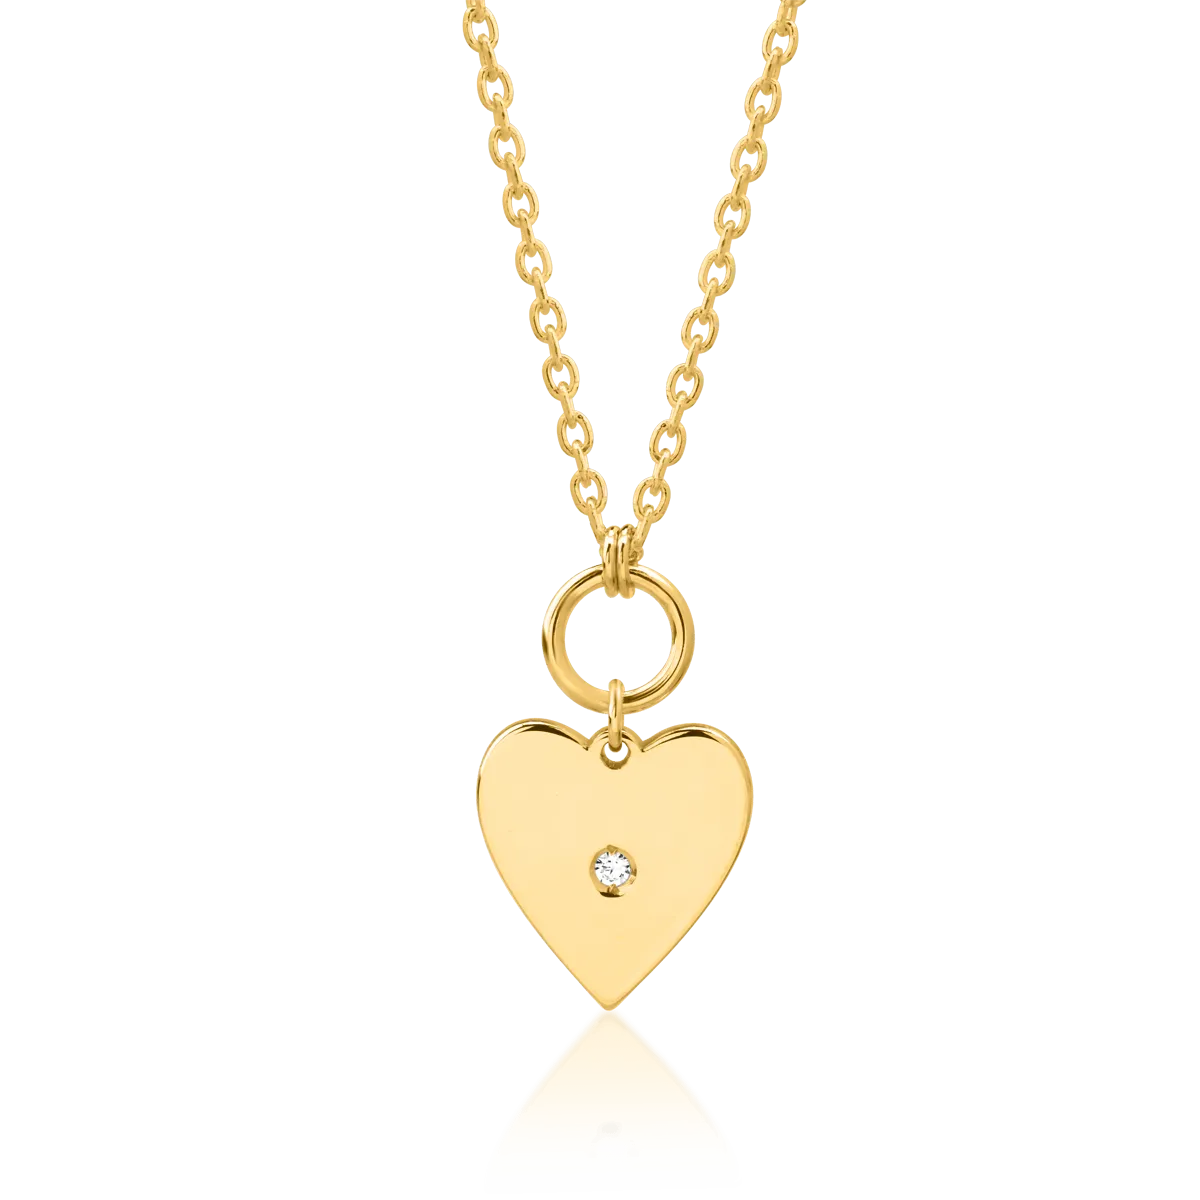 14K yellow gold necklace with heart pendant